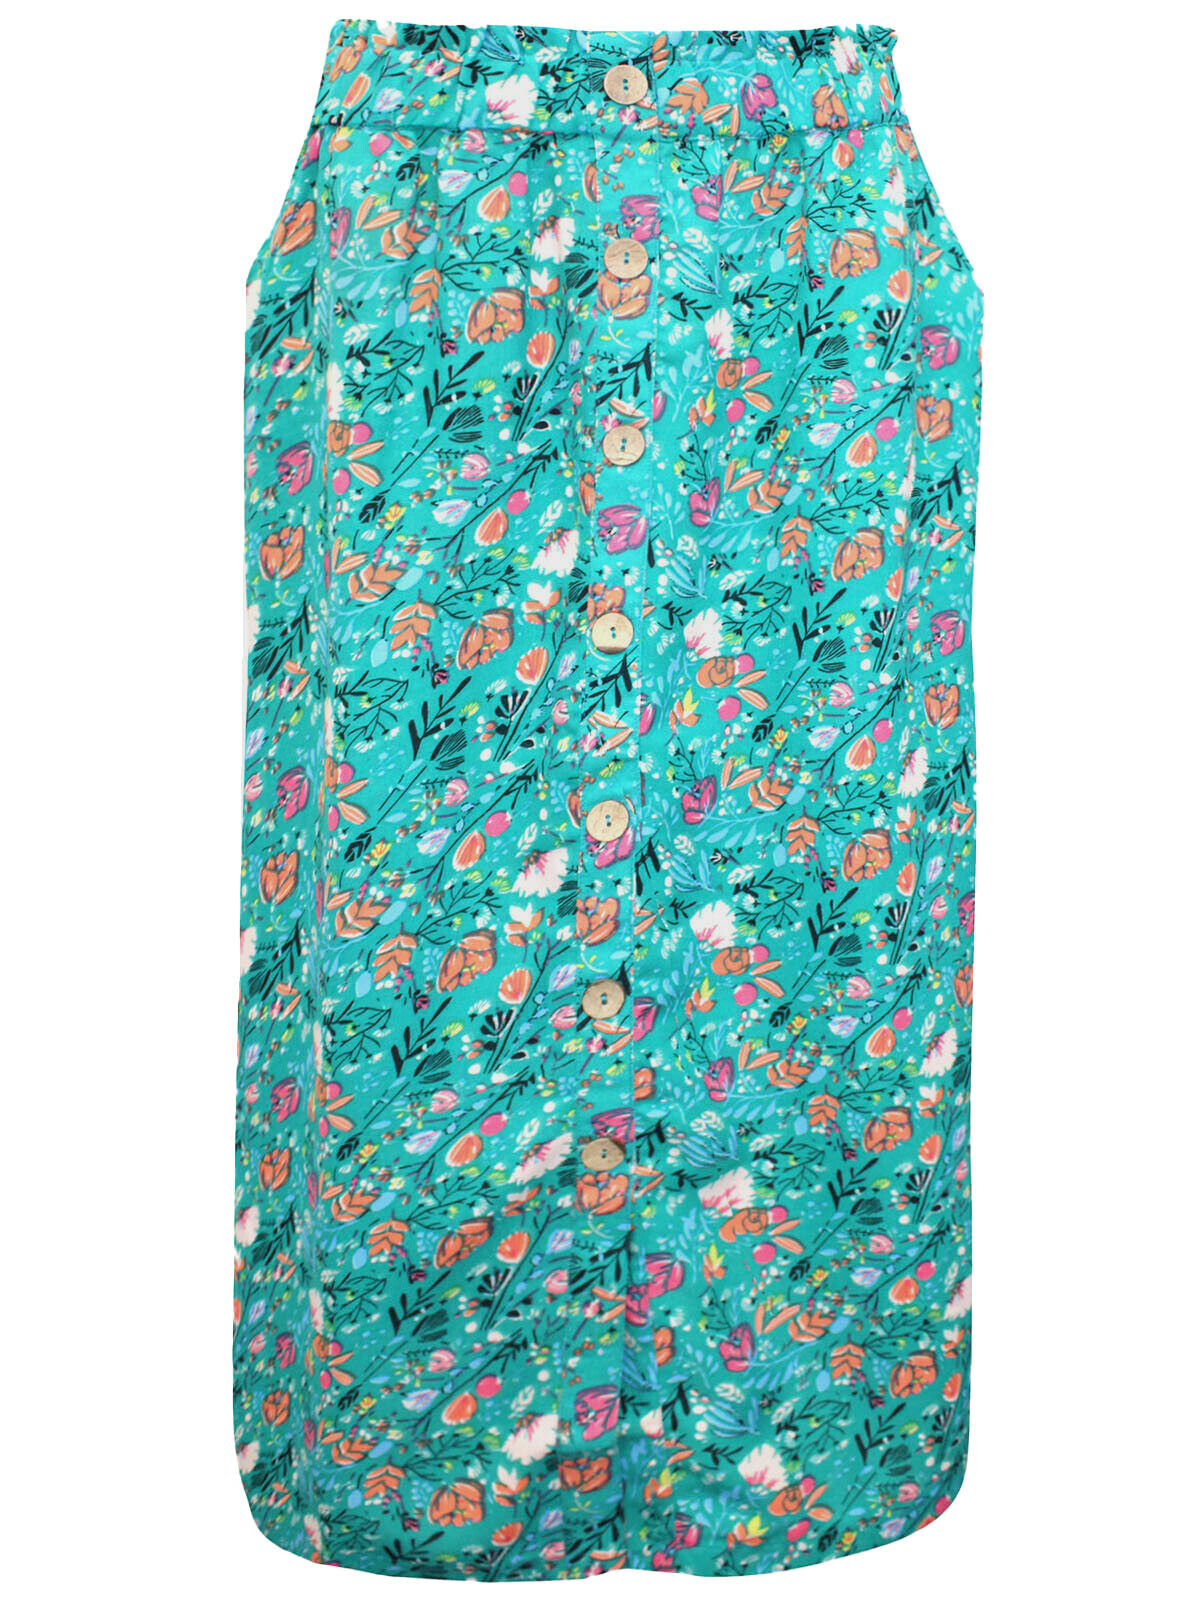 Blancheporte Green Floral Print Button Front Maxi Skirt UK Sizes 20, 22, 24, 26